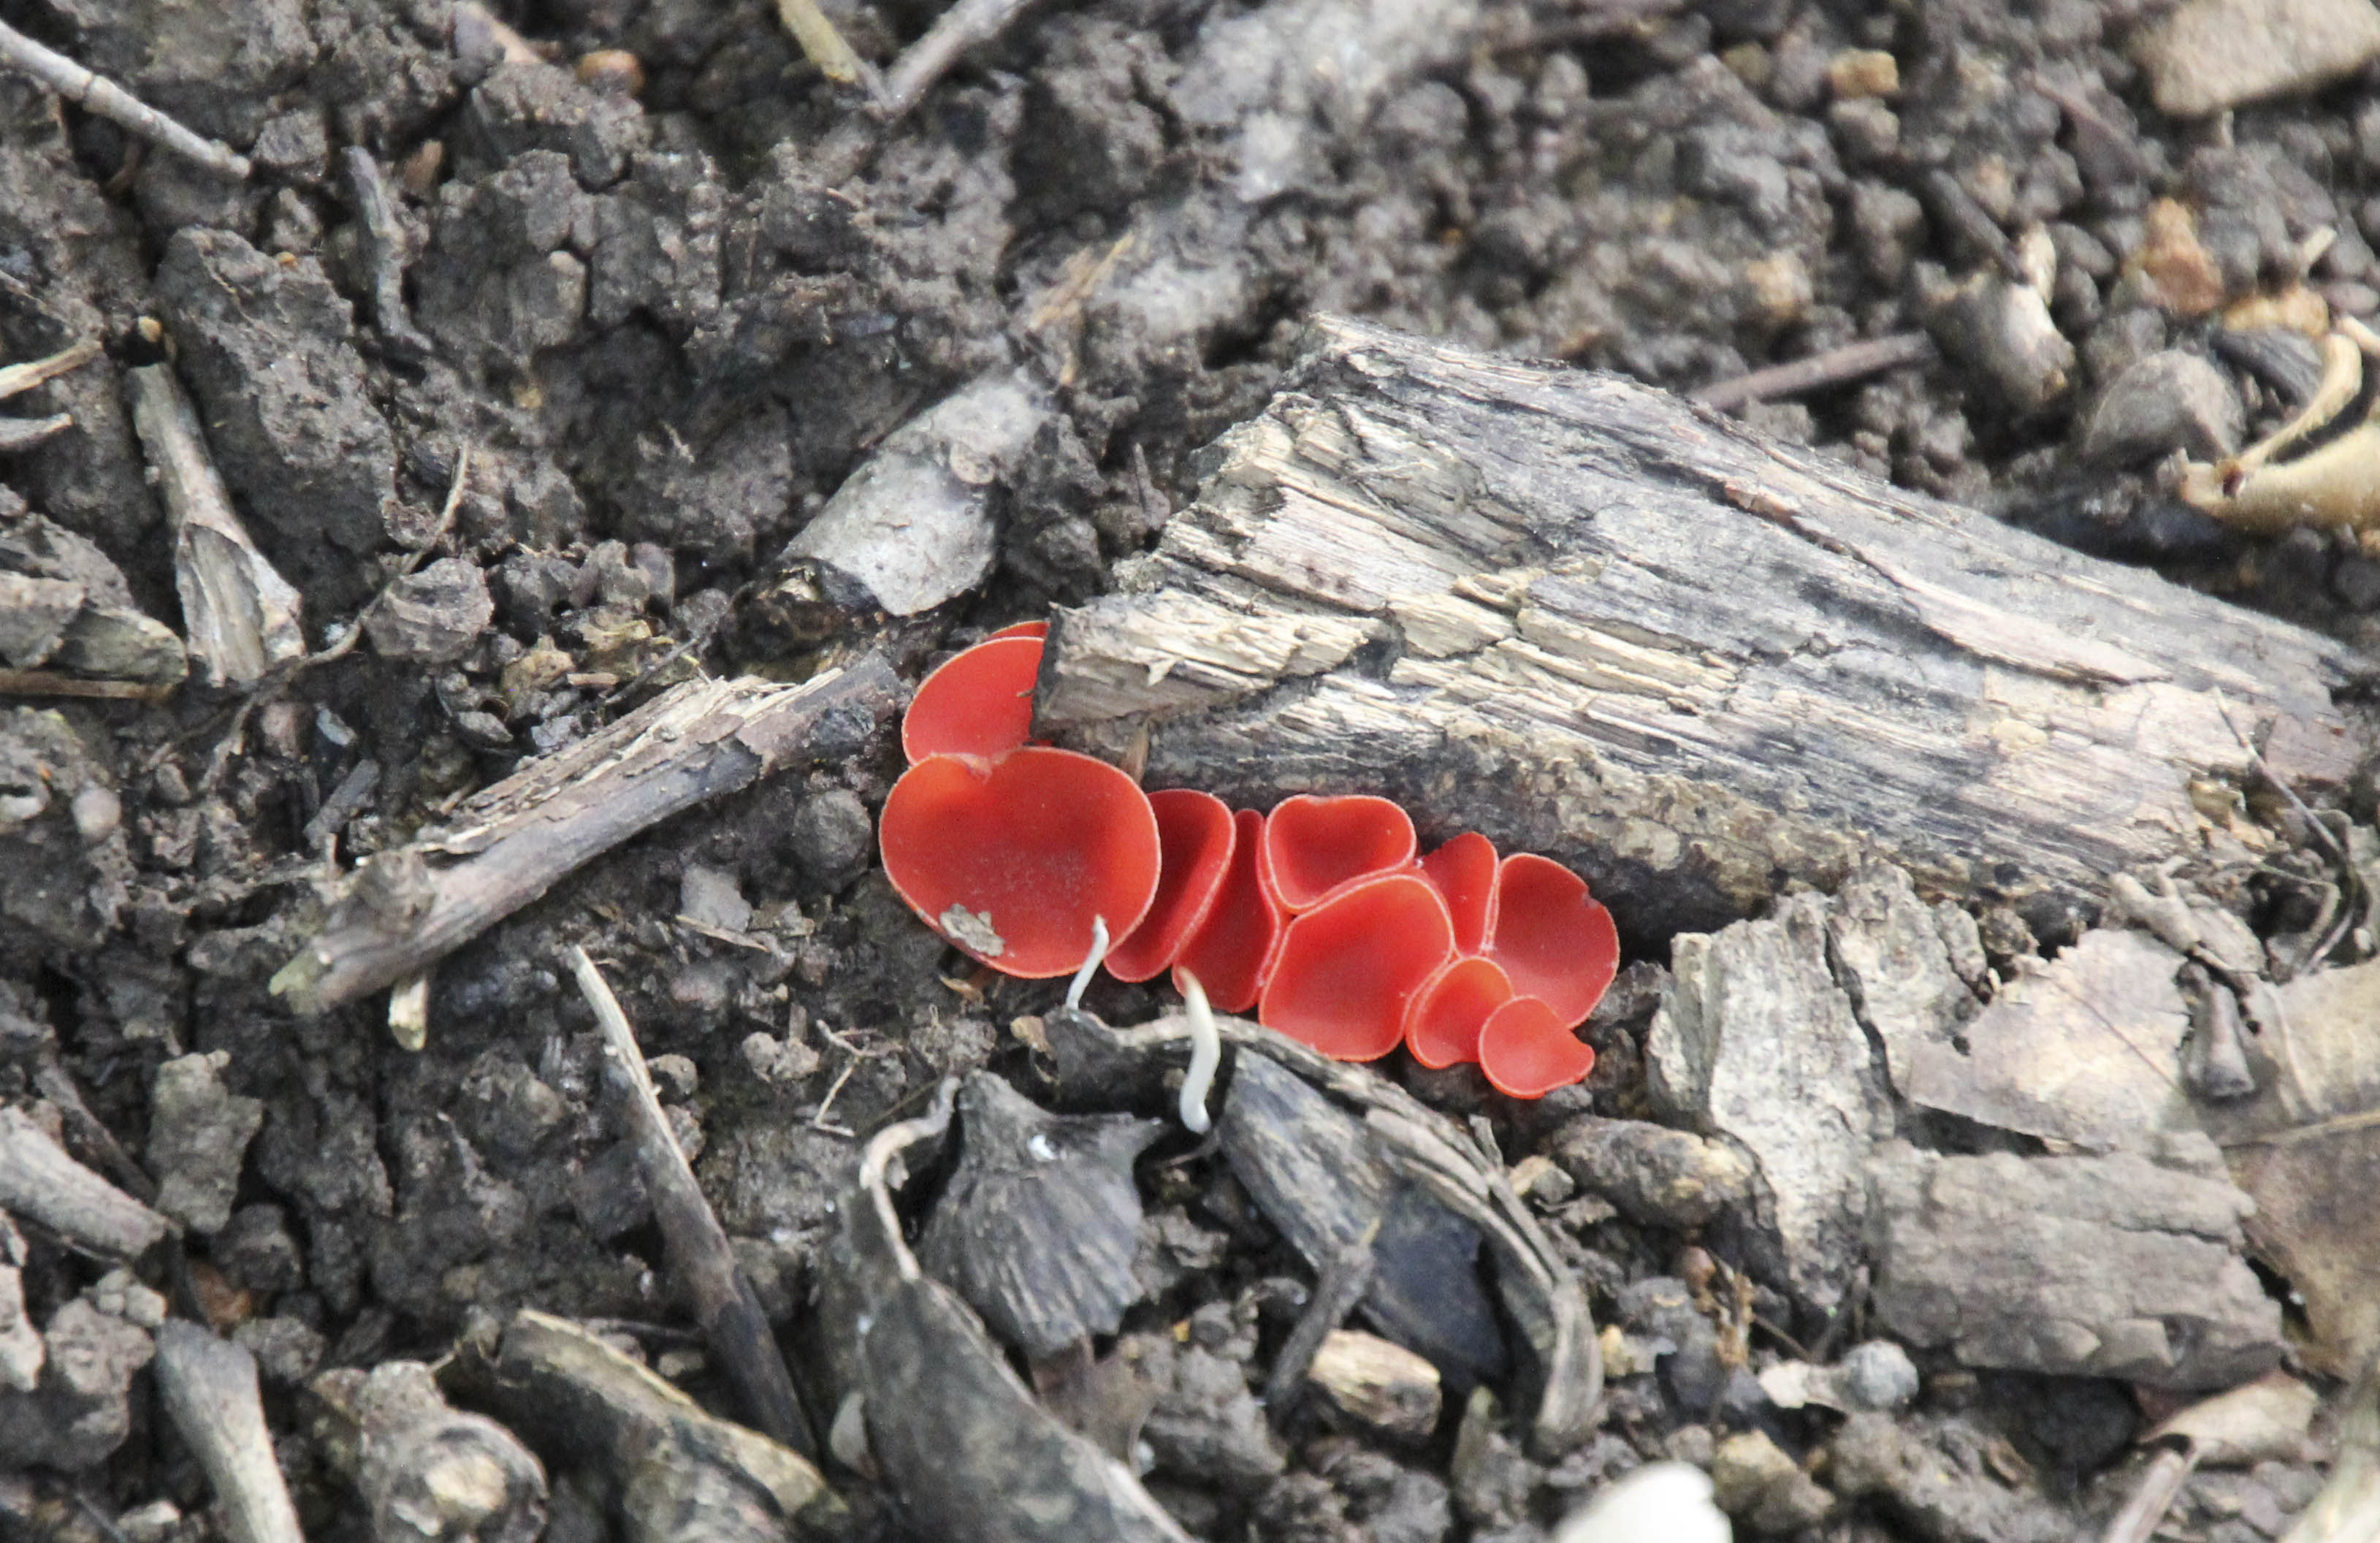 Photo of stalked scarlet cup cluster, red, cup-shaped mushrooms